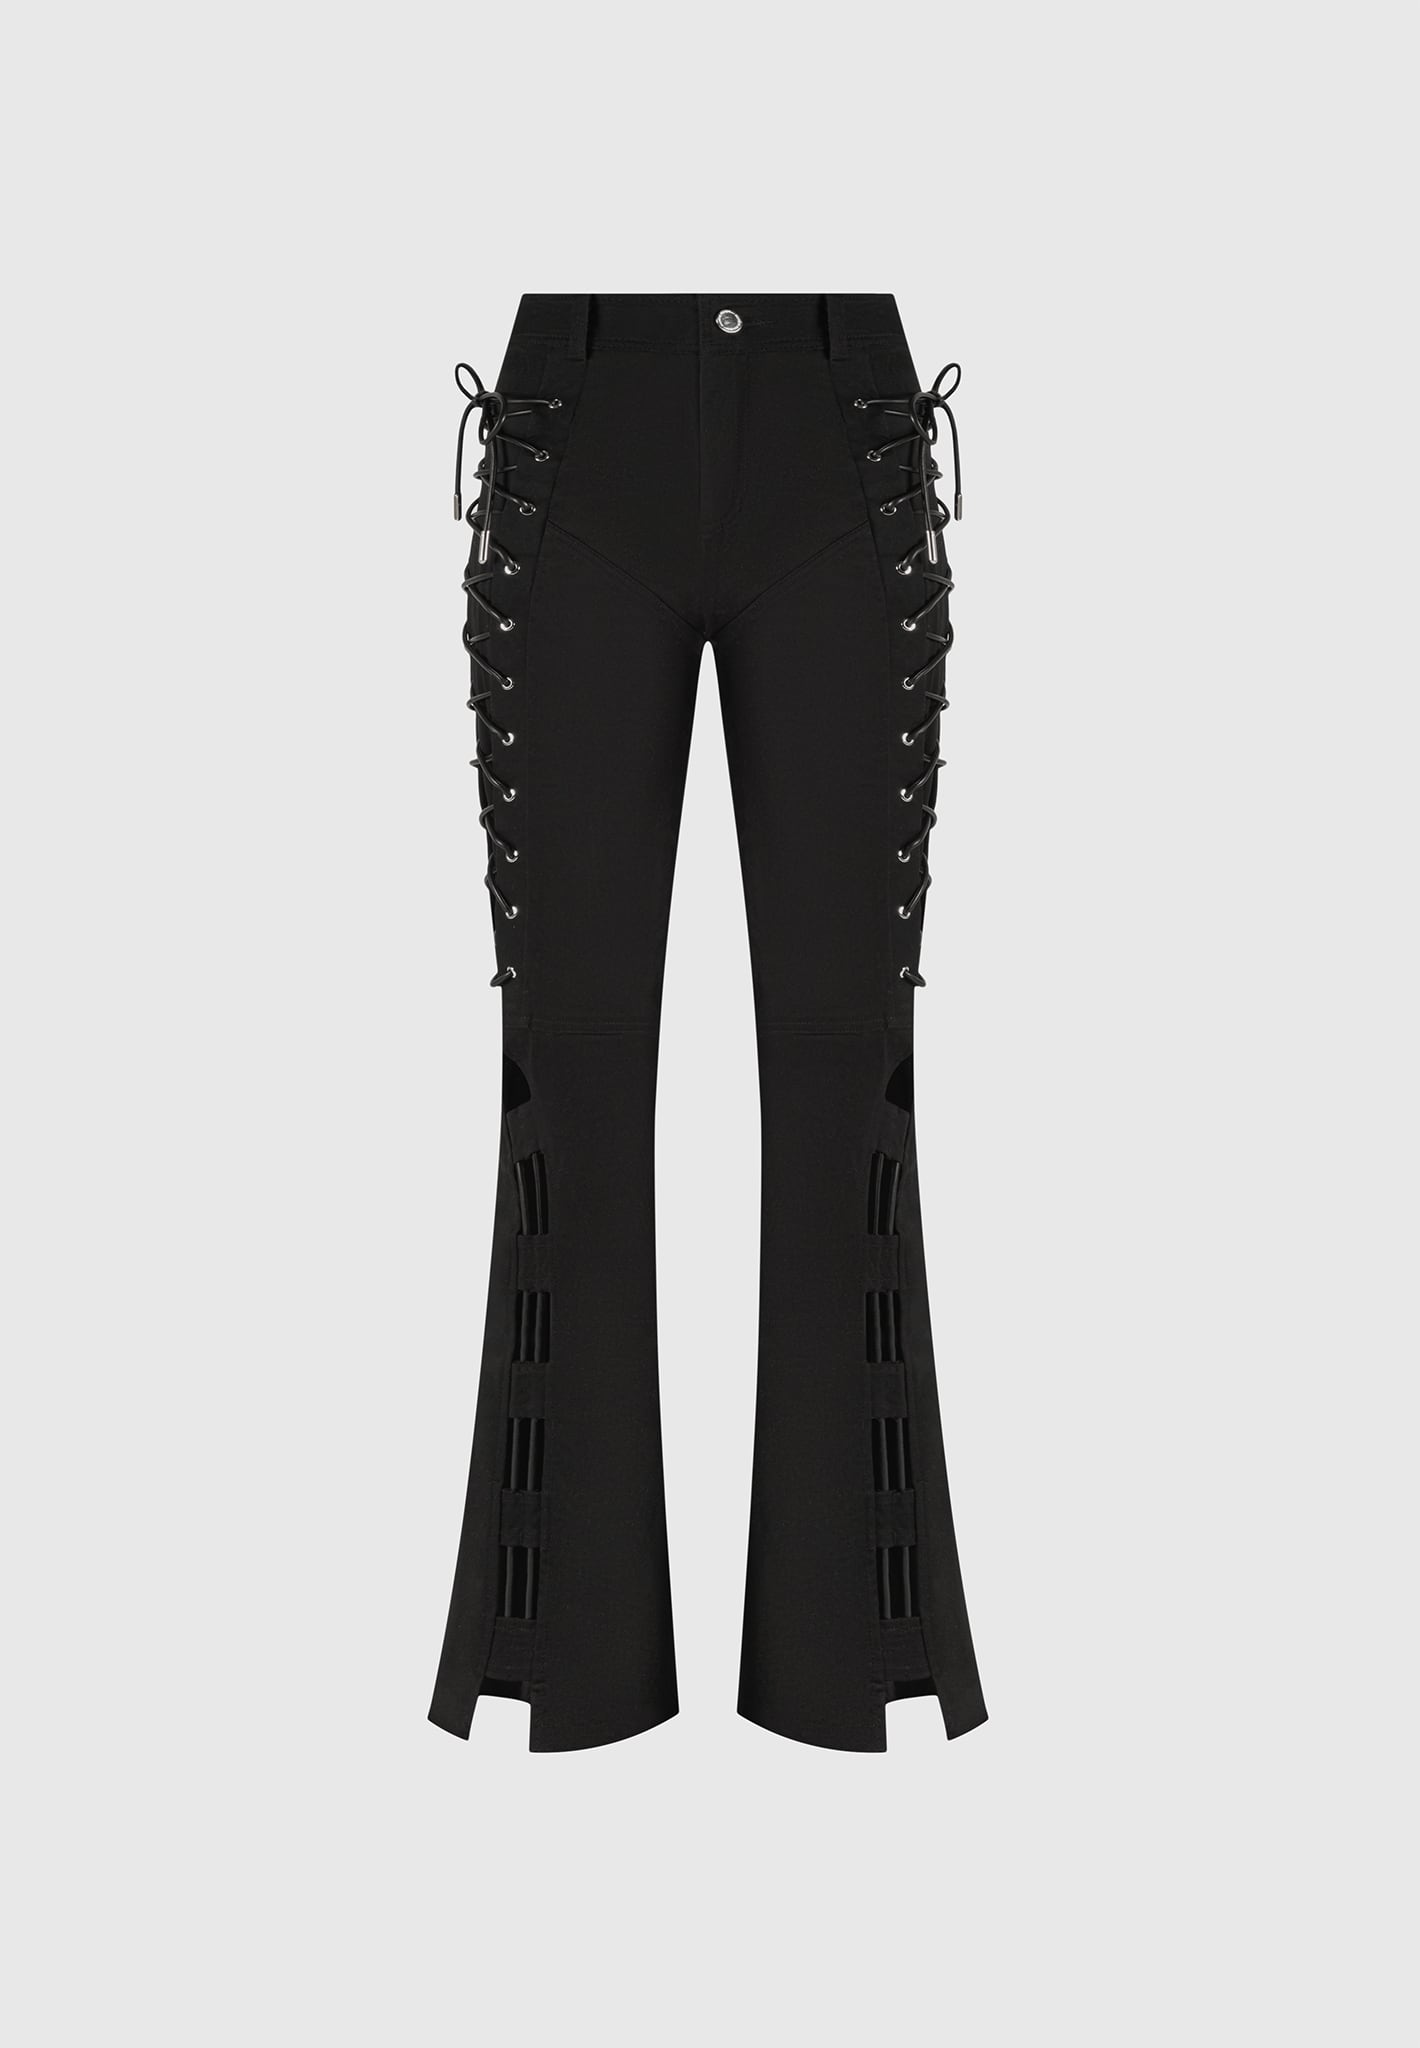 Lace Up Trousers - Black